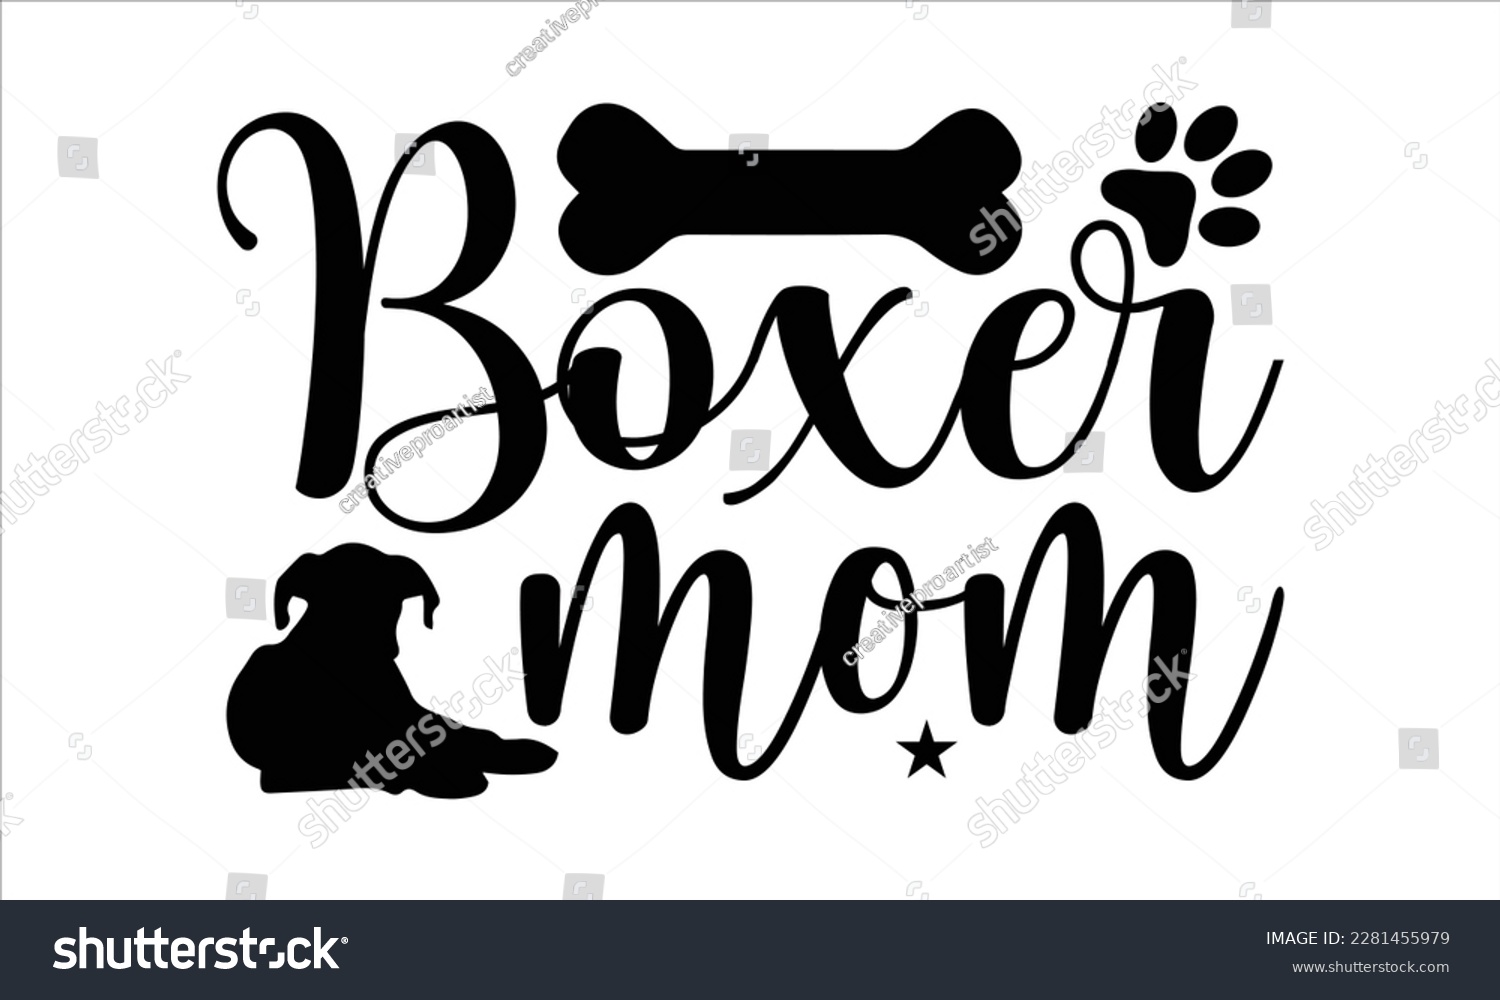 SVG of Boxer mom- Boxer Dog T- shirt design, Hand drawn lettering phrase, for Cutting Machine, Silhouette Cameo, Cricut eps, svg Files for Cutting, EPS 10 svg